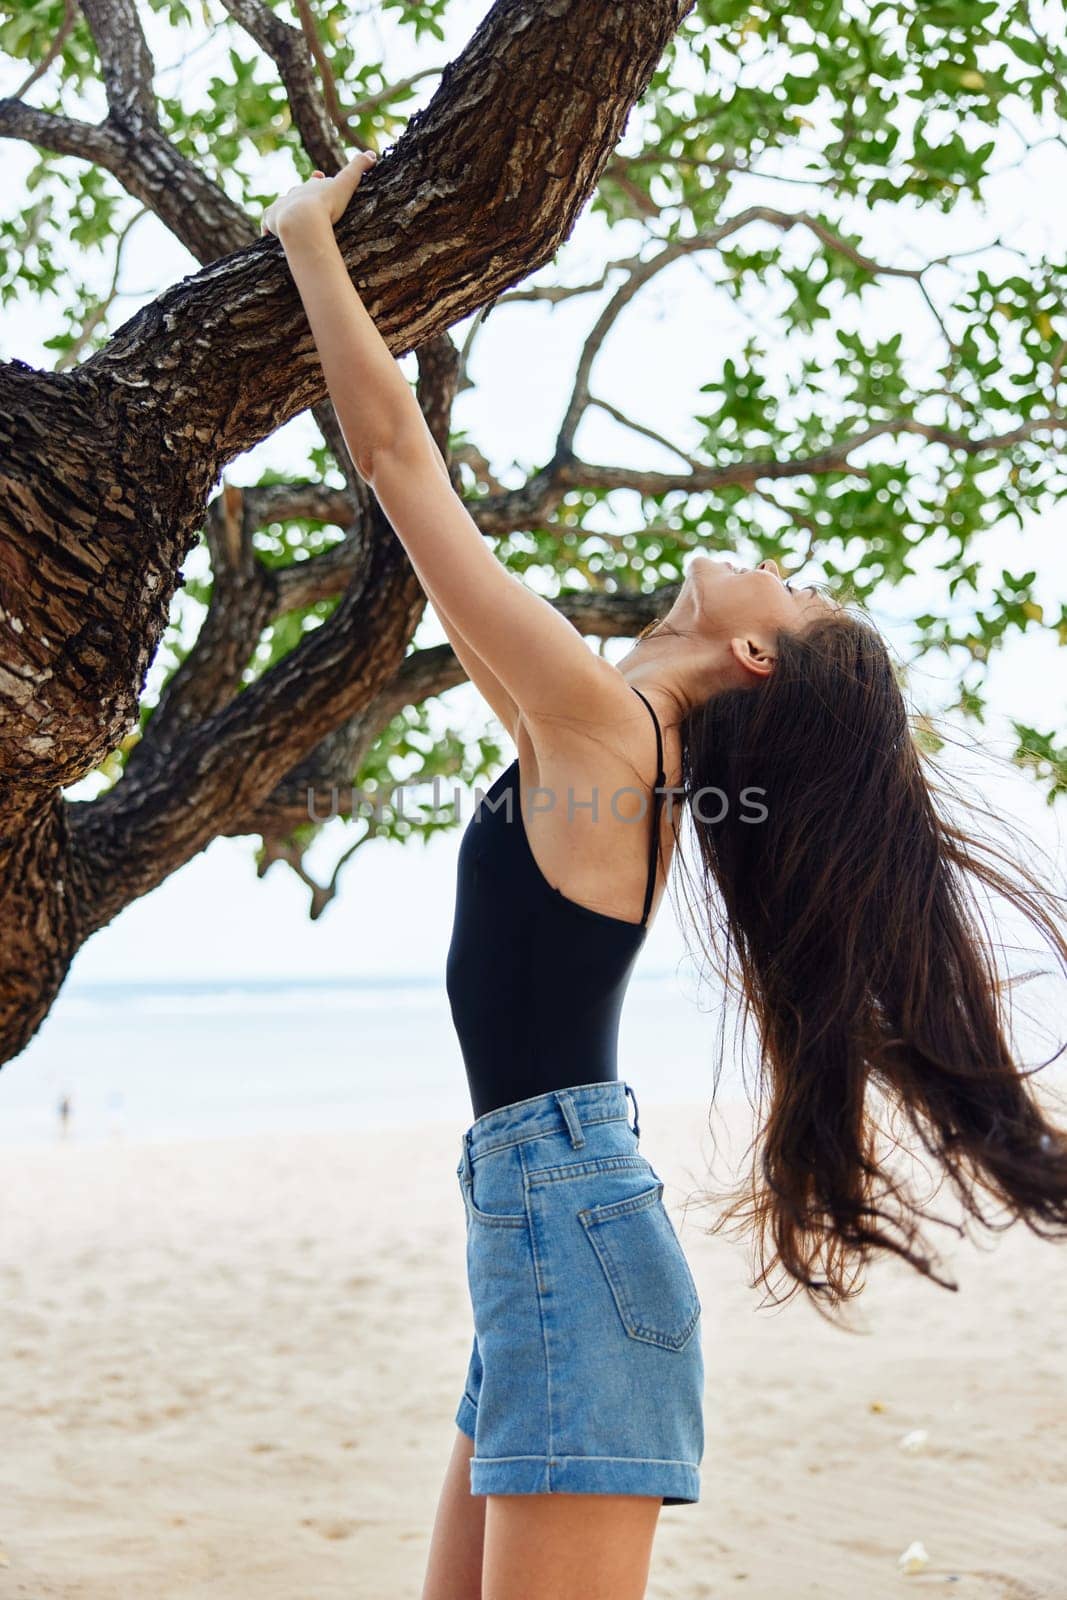 hair woman relax nature lifestyle smiling tree sea hanging sky vacation long by SHOTPRIME